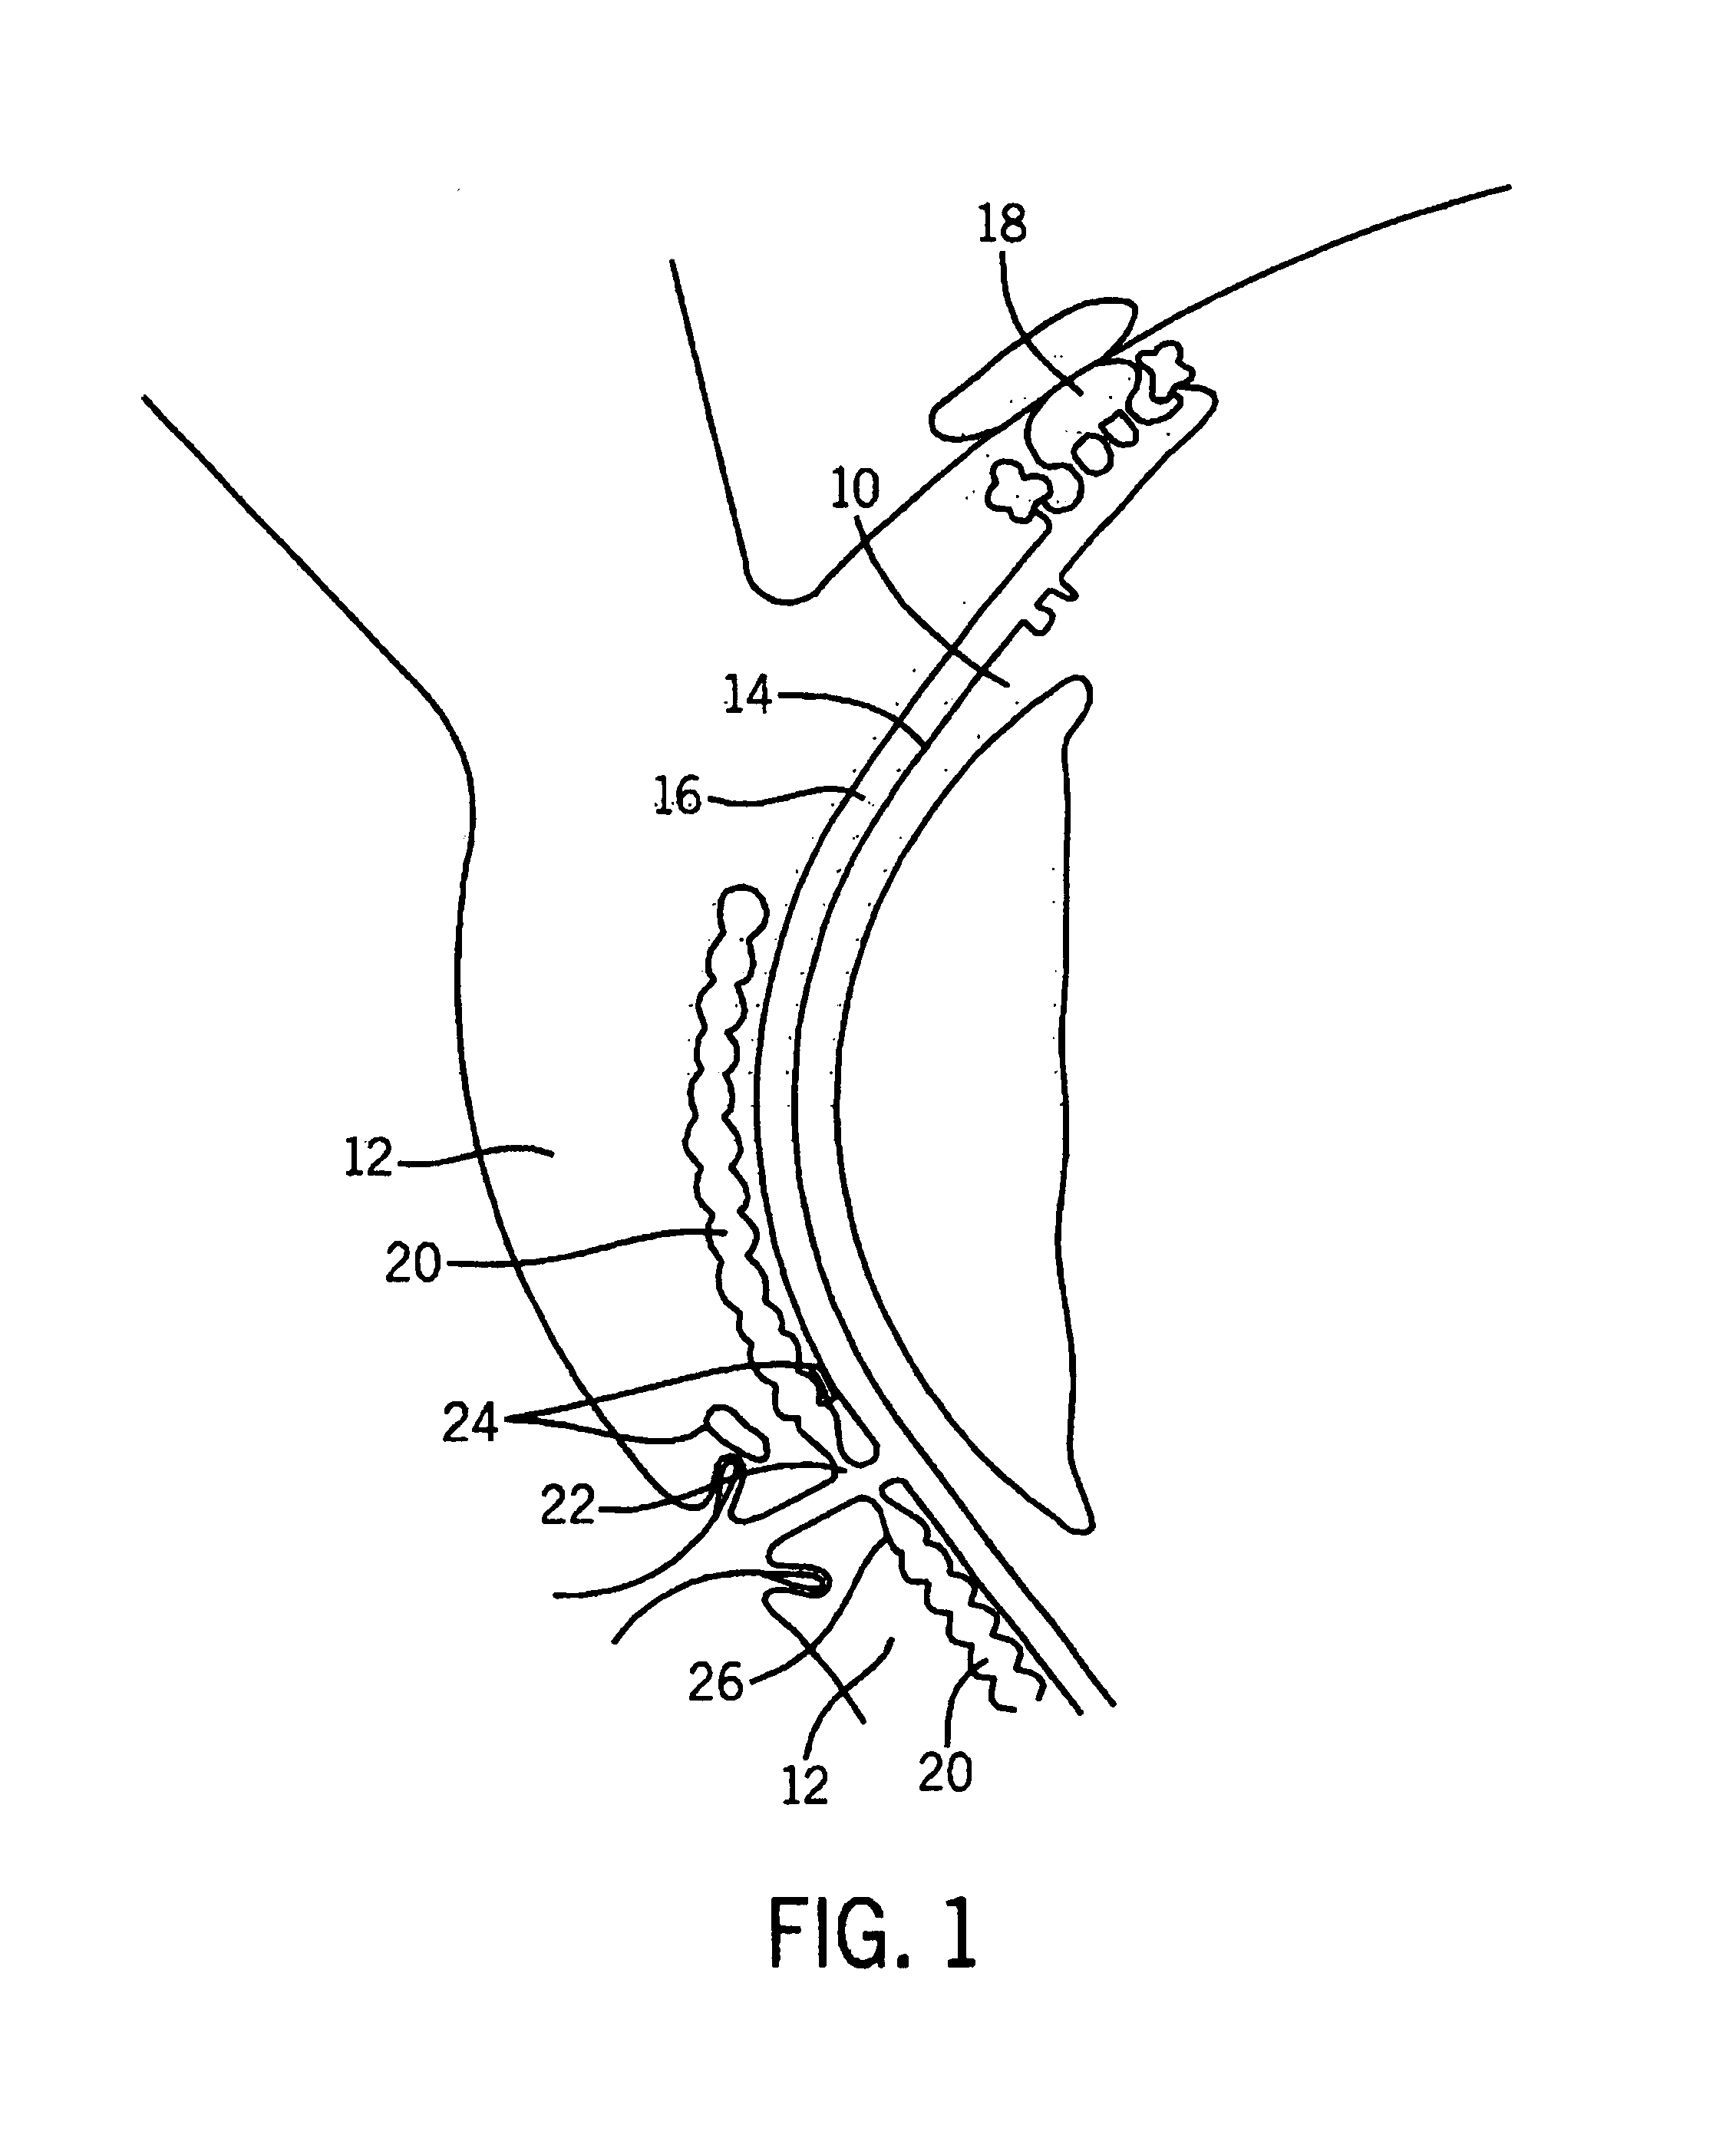 Method and apparatus for preventing and treating eyelid problems